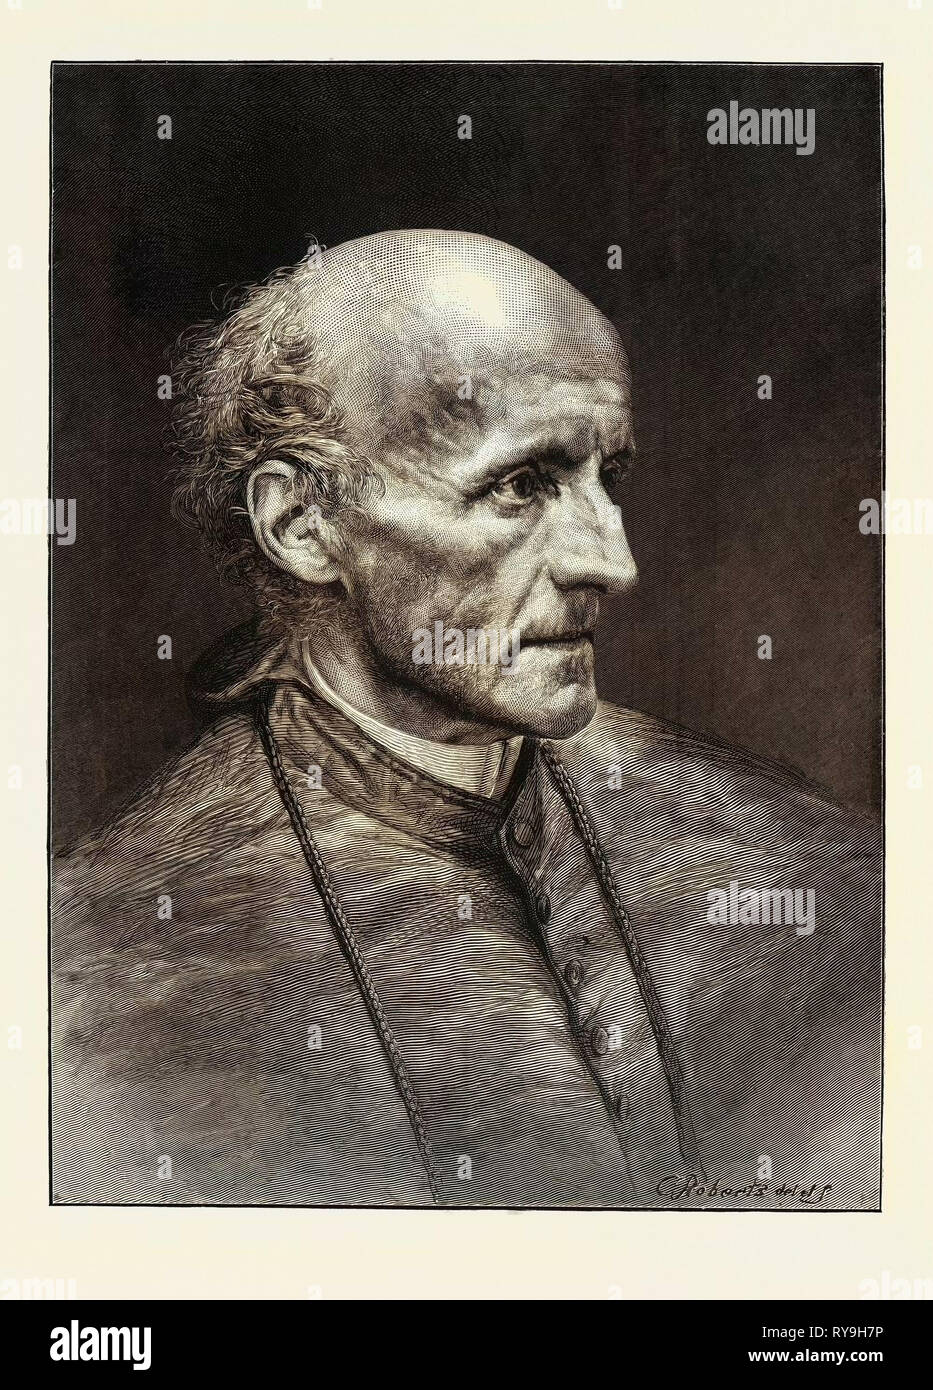 Il Reverendissimo Henry Edward Manning, D.D., Arcivescovo cattolico di Westminster Foto Stock